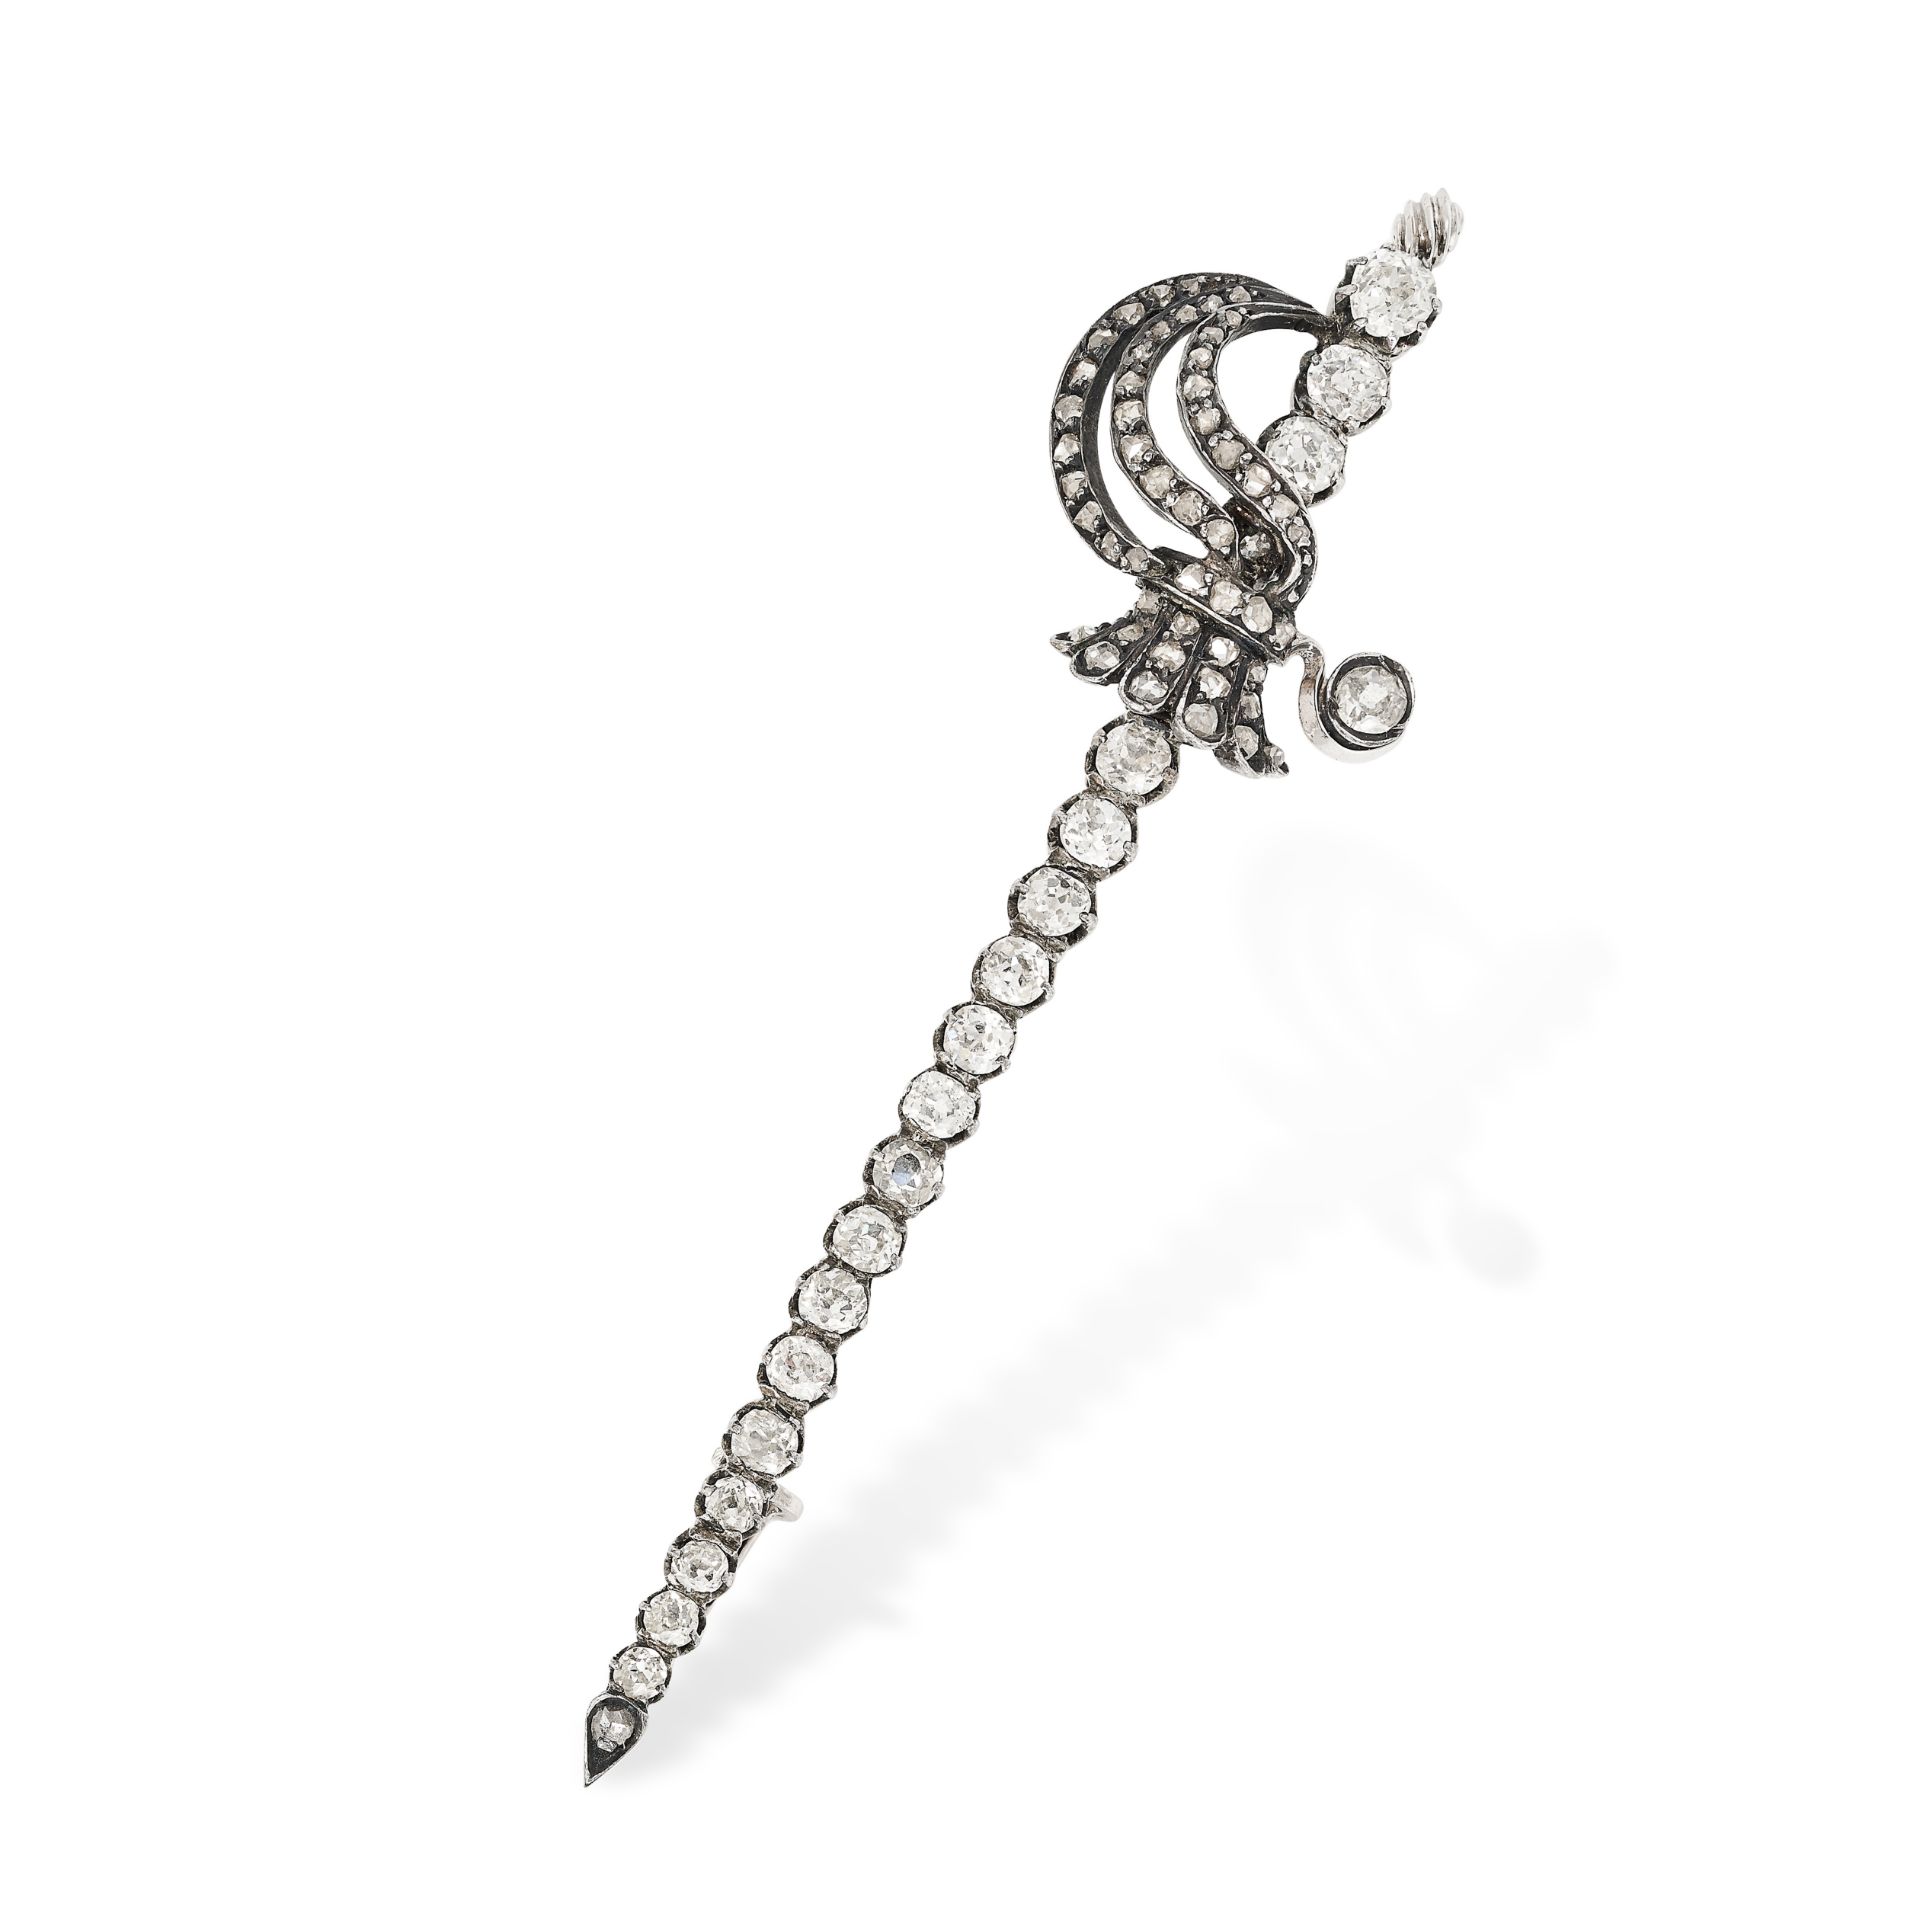 AN ANTIQUE DIAMOND SWORD BROOCH designed as a French sword, set with old and rose cut diamonds